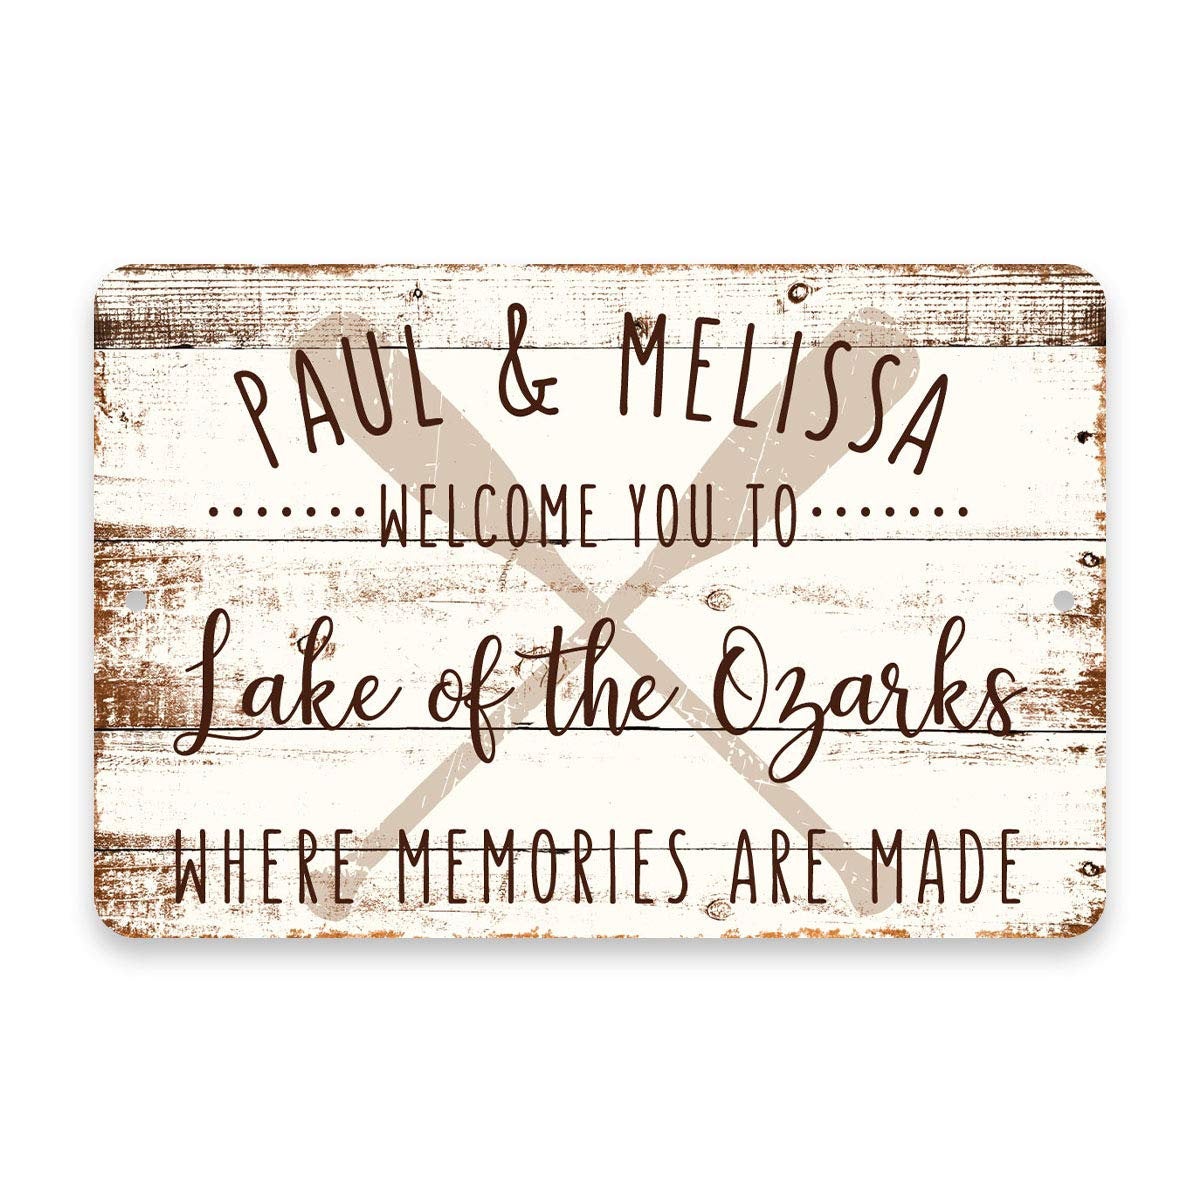 Personalized Welcome to Lake of The Ozarks Where Memories are Made Sign - 8 X 12 Metal Sign with Wood Look